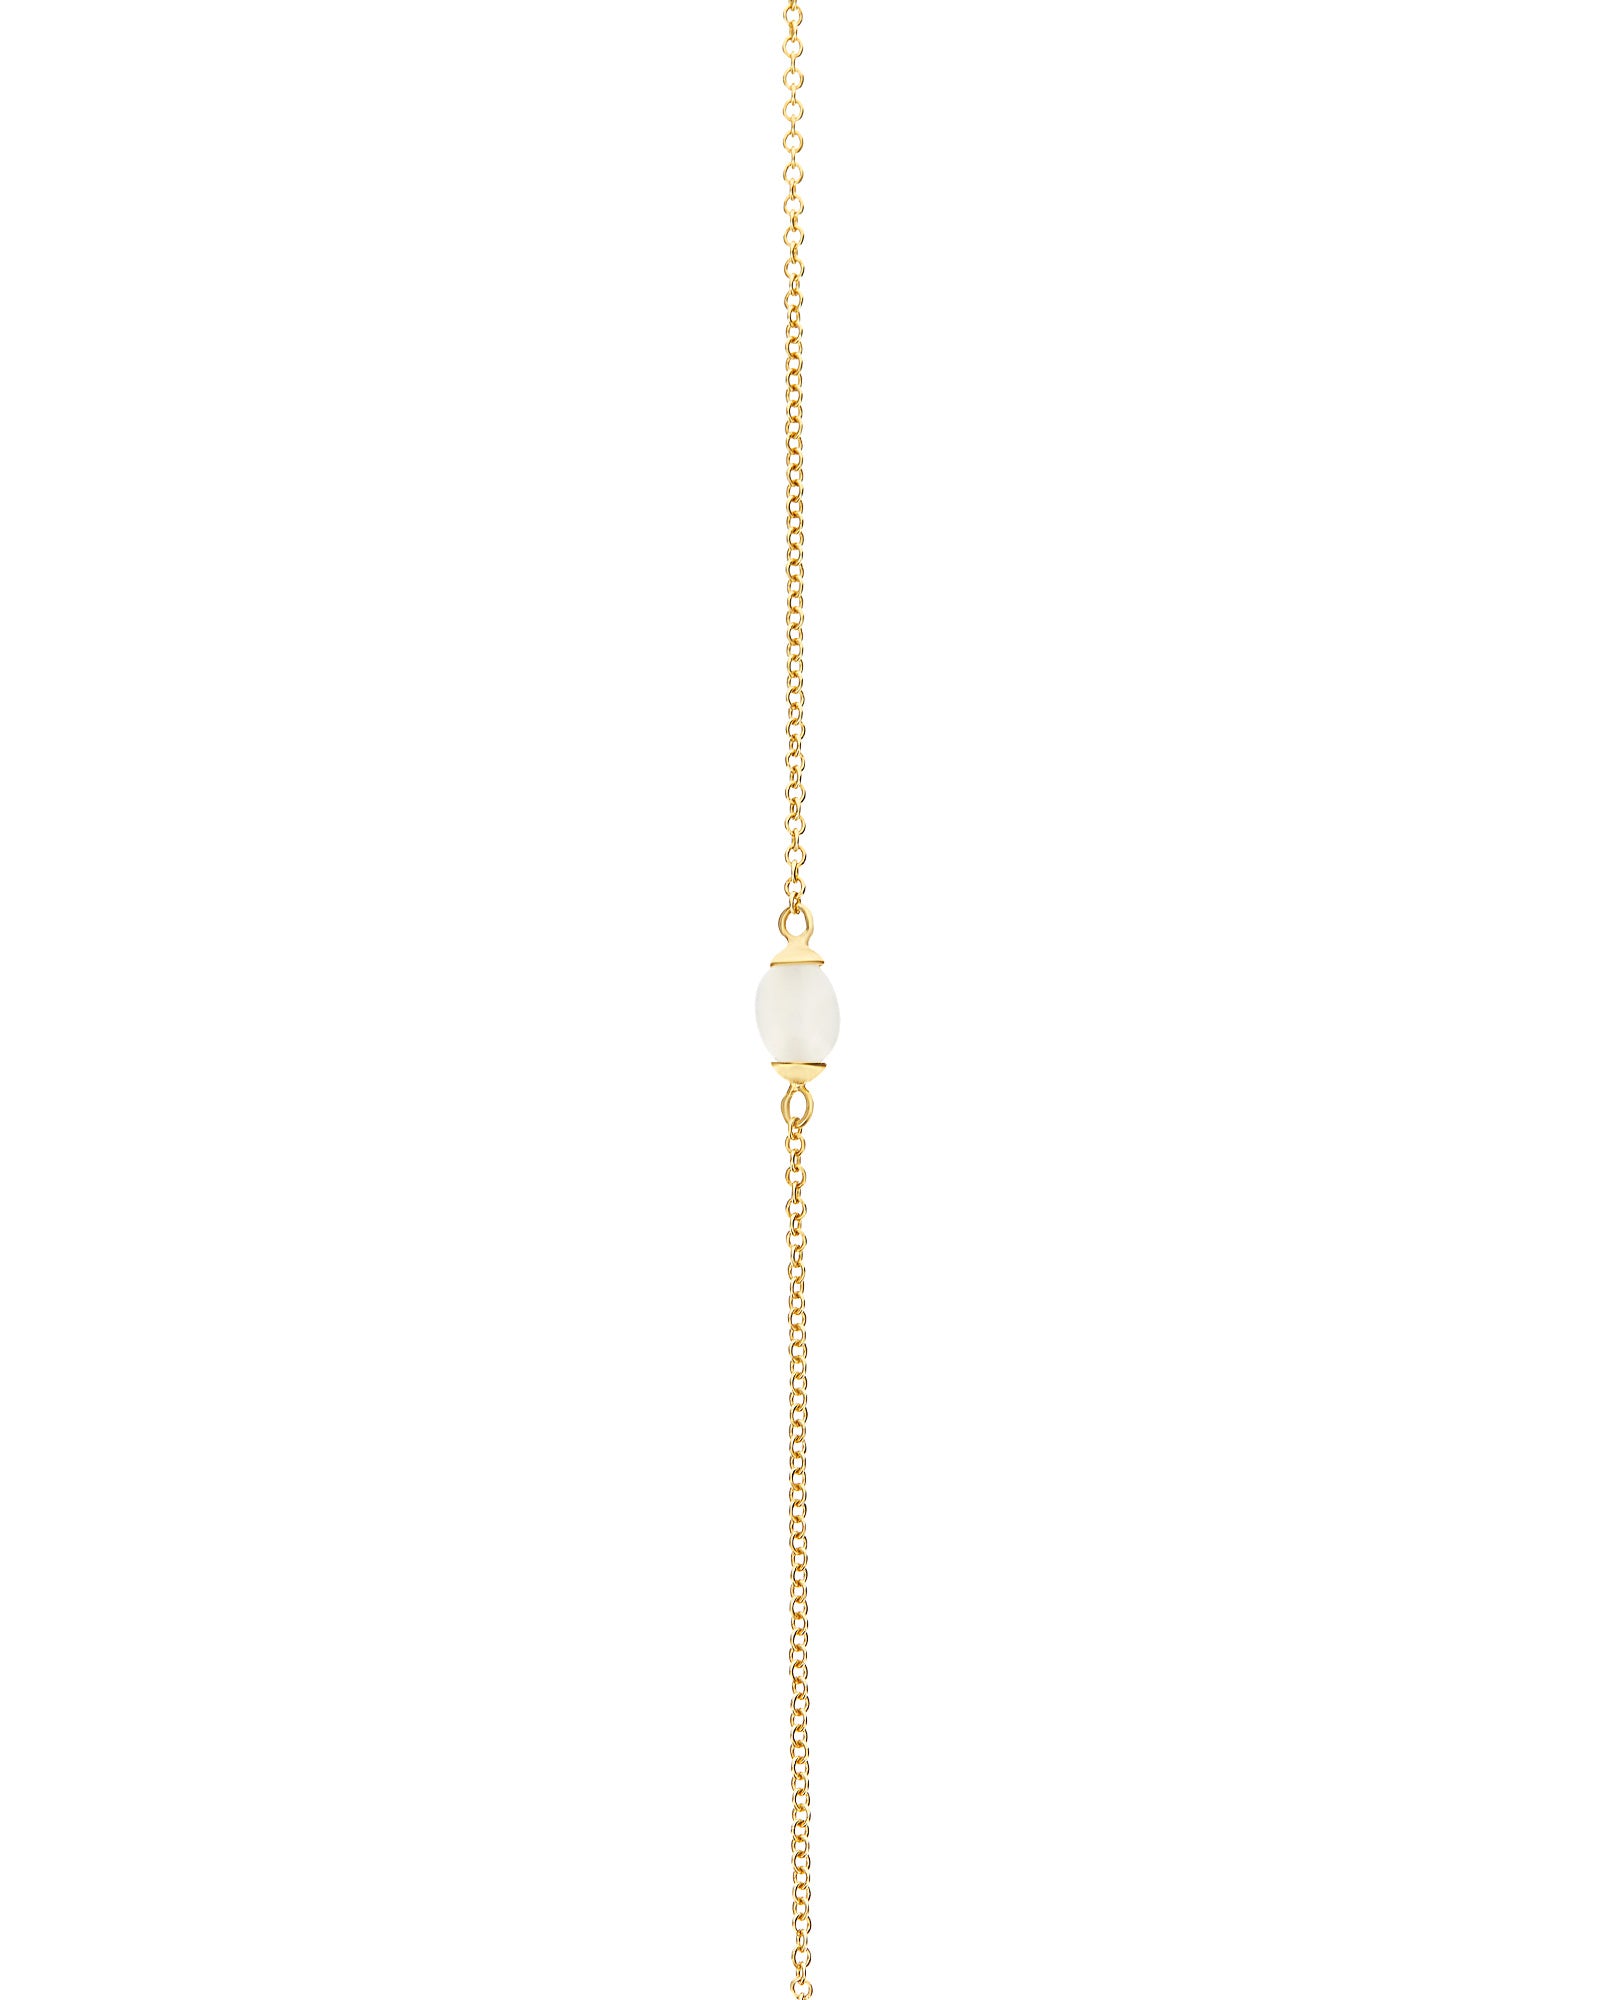 "White Desert" Gold and Moonstone Necklace (SMALL)